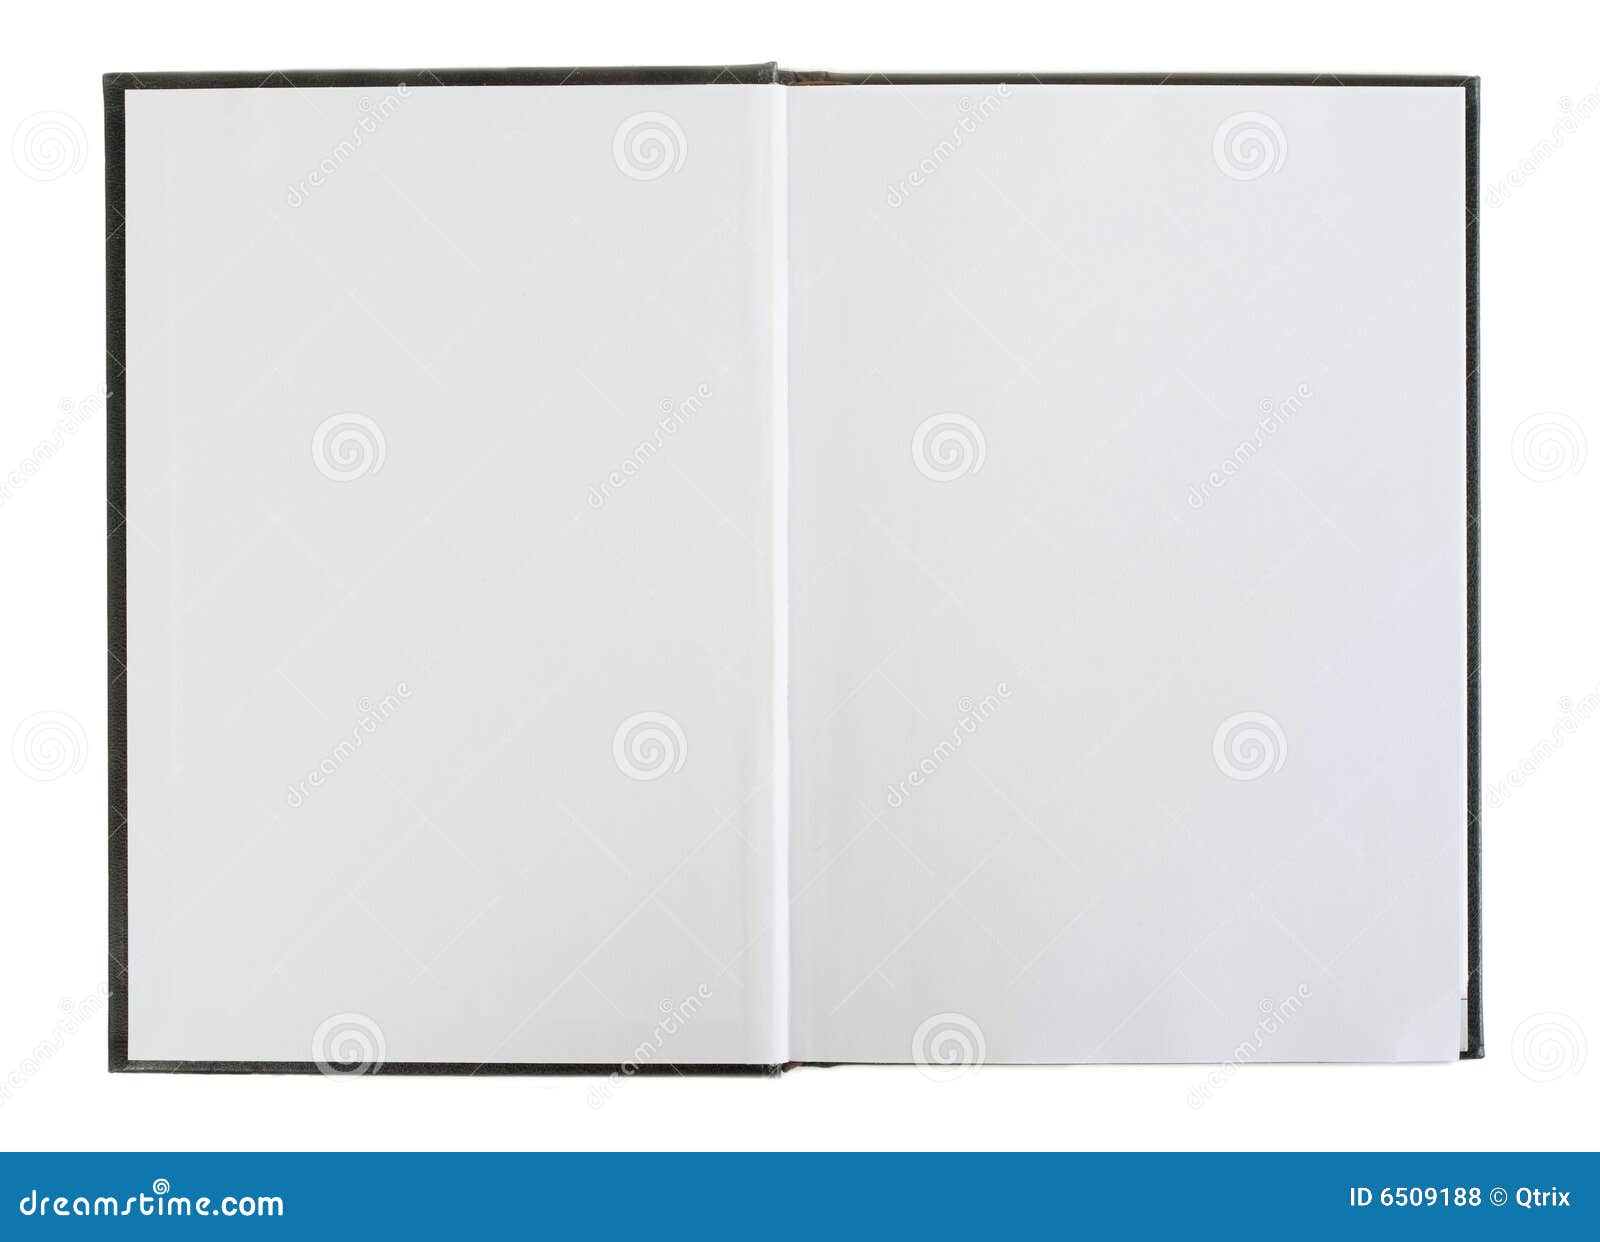 clipart of open book with blank pages - photo #48